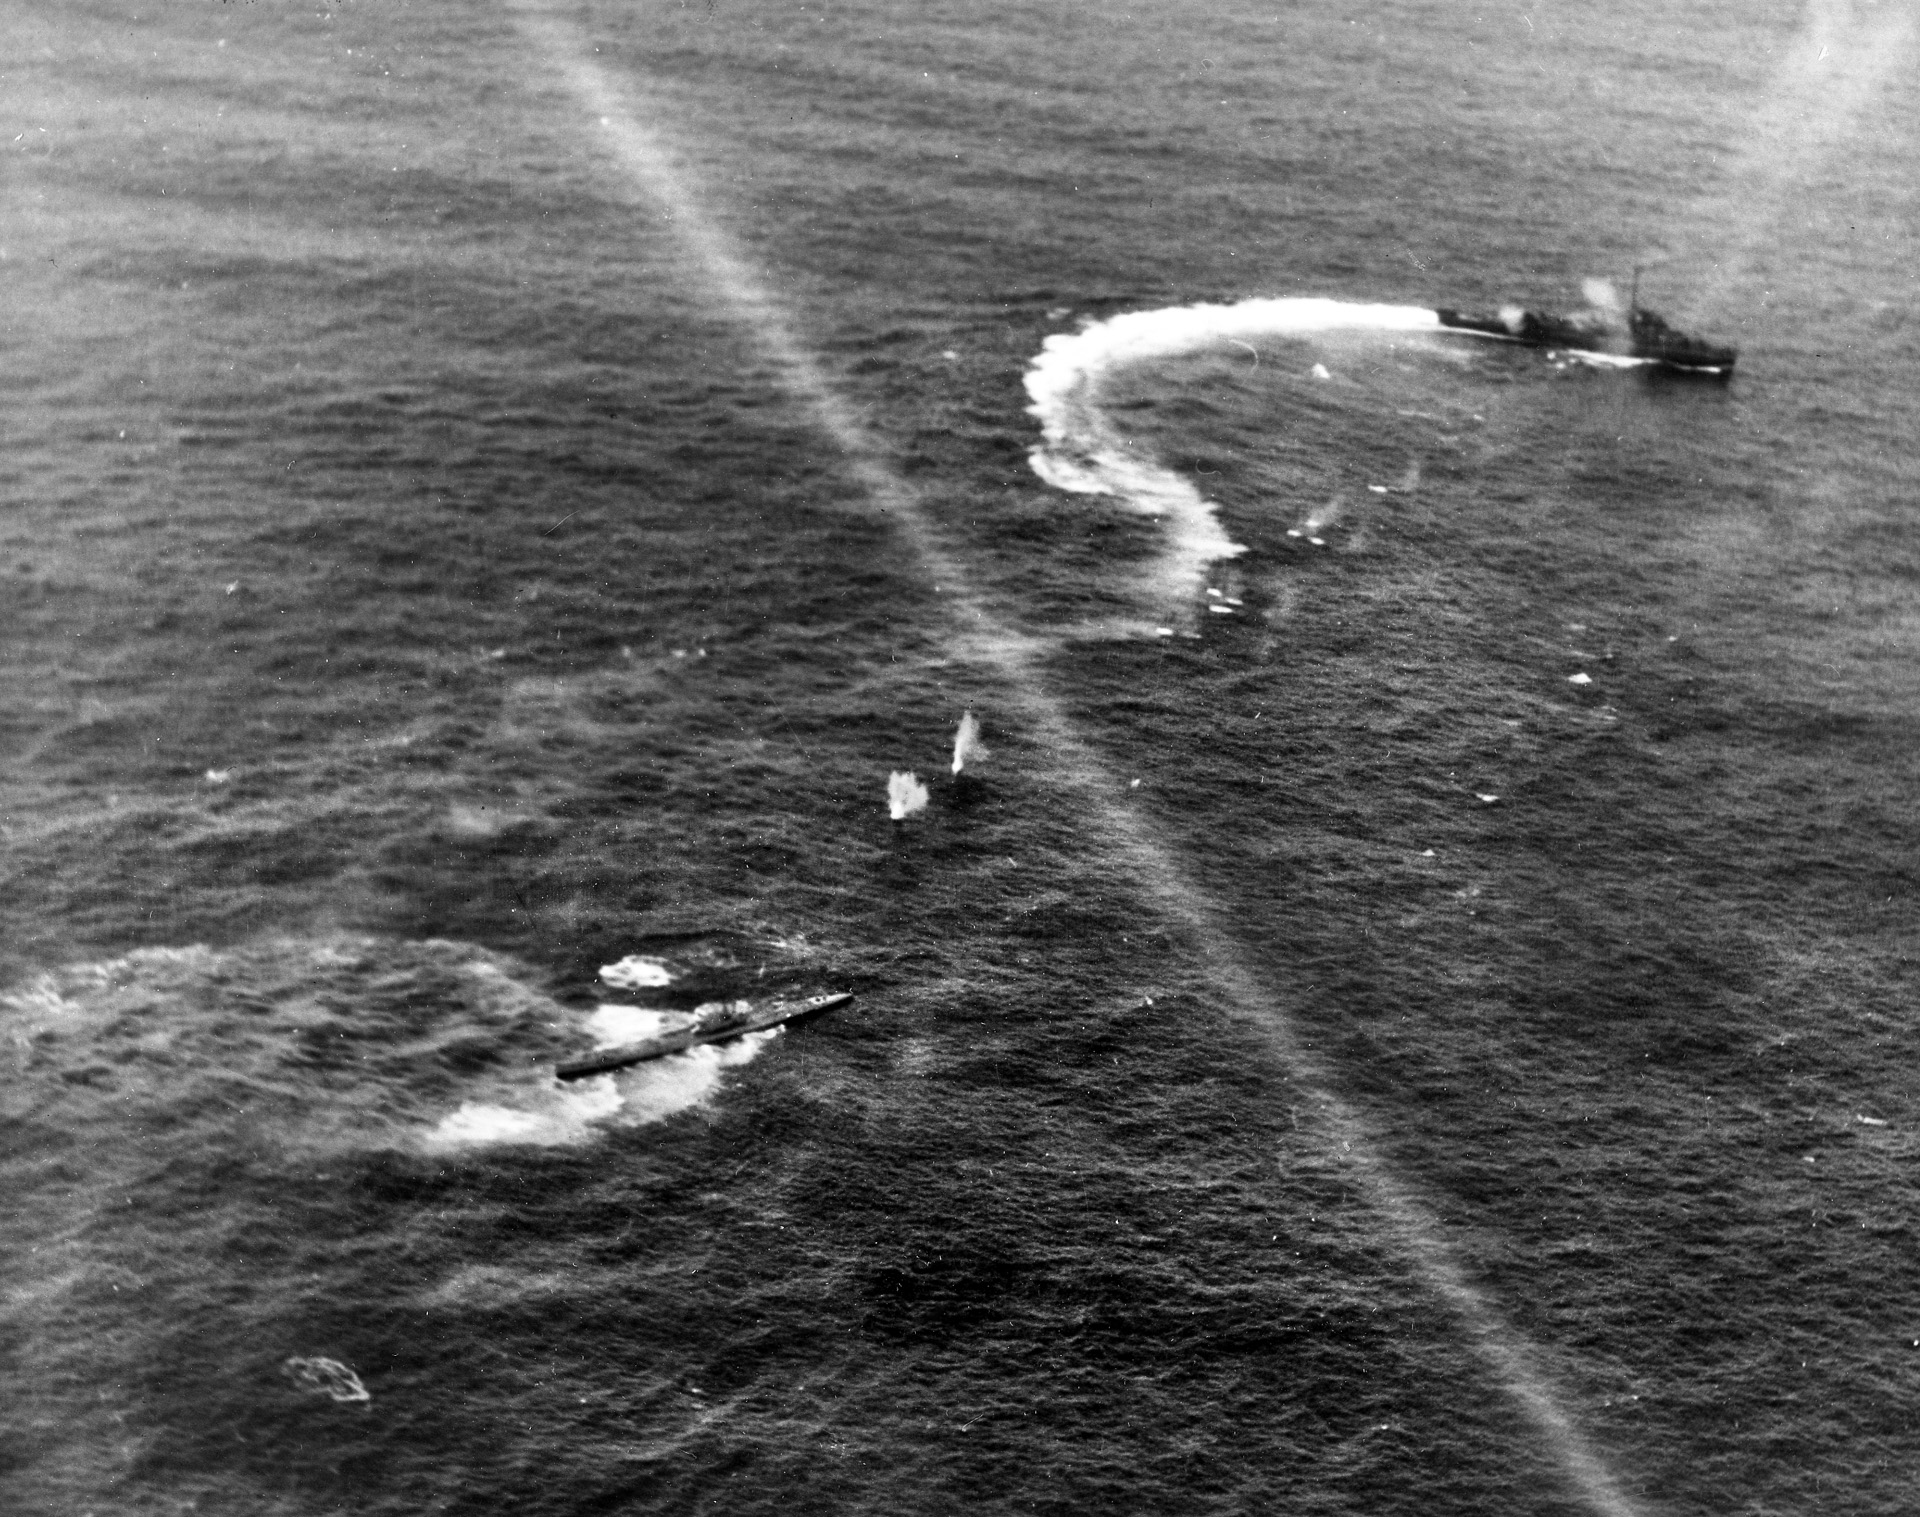 The German submarine U-515 comes under attack by U.S. Navy destroyers and aircraft from the escort carrier USS Guadalcanal. The U-boat was sunk in this action, which occurred in April 1944. 